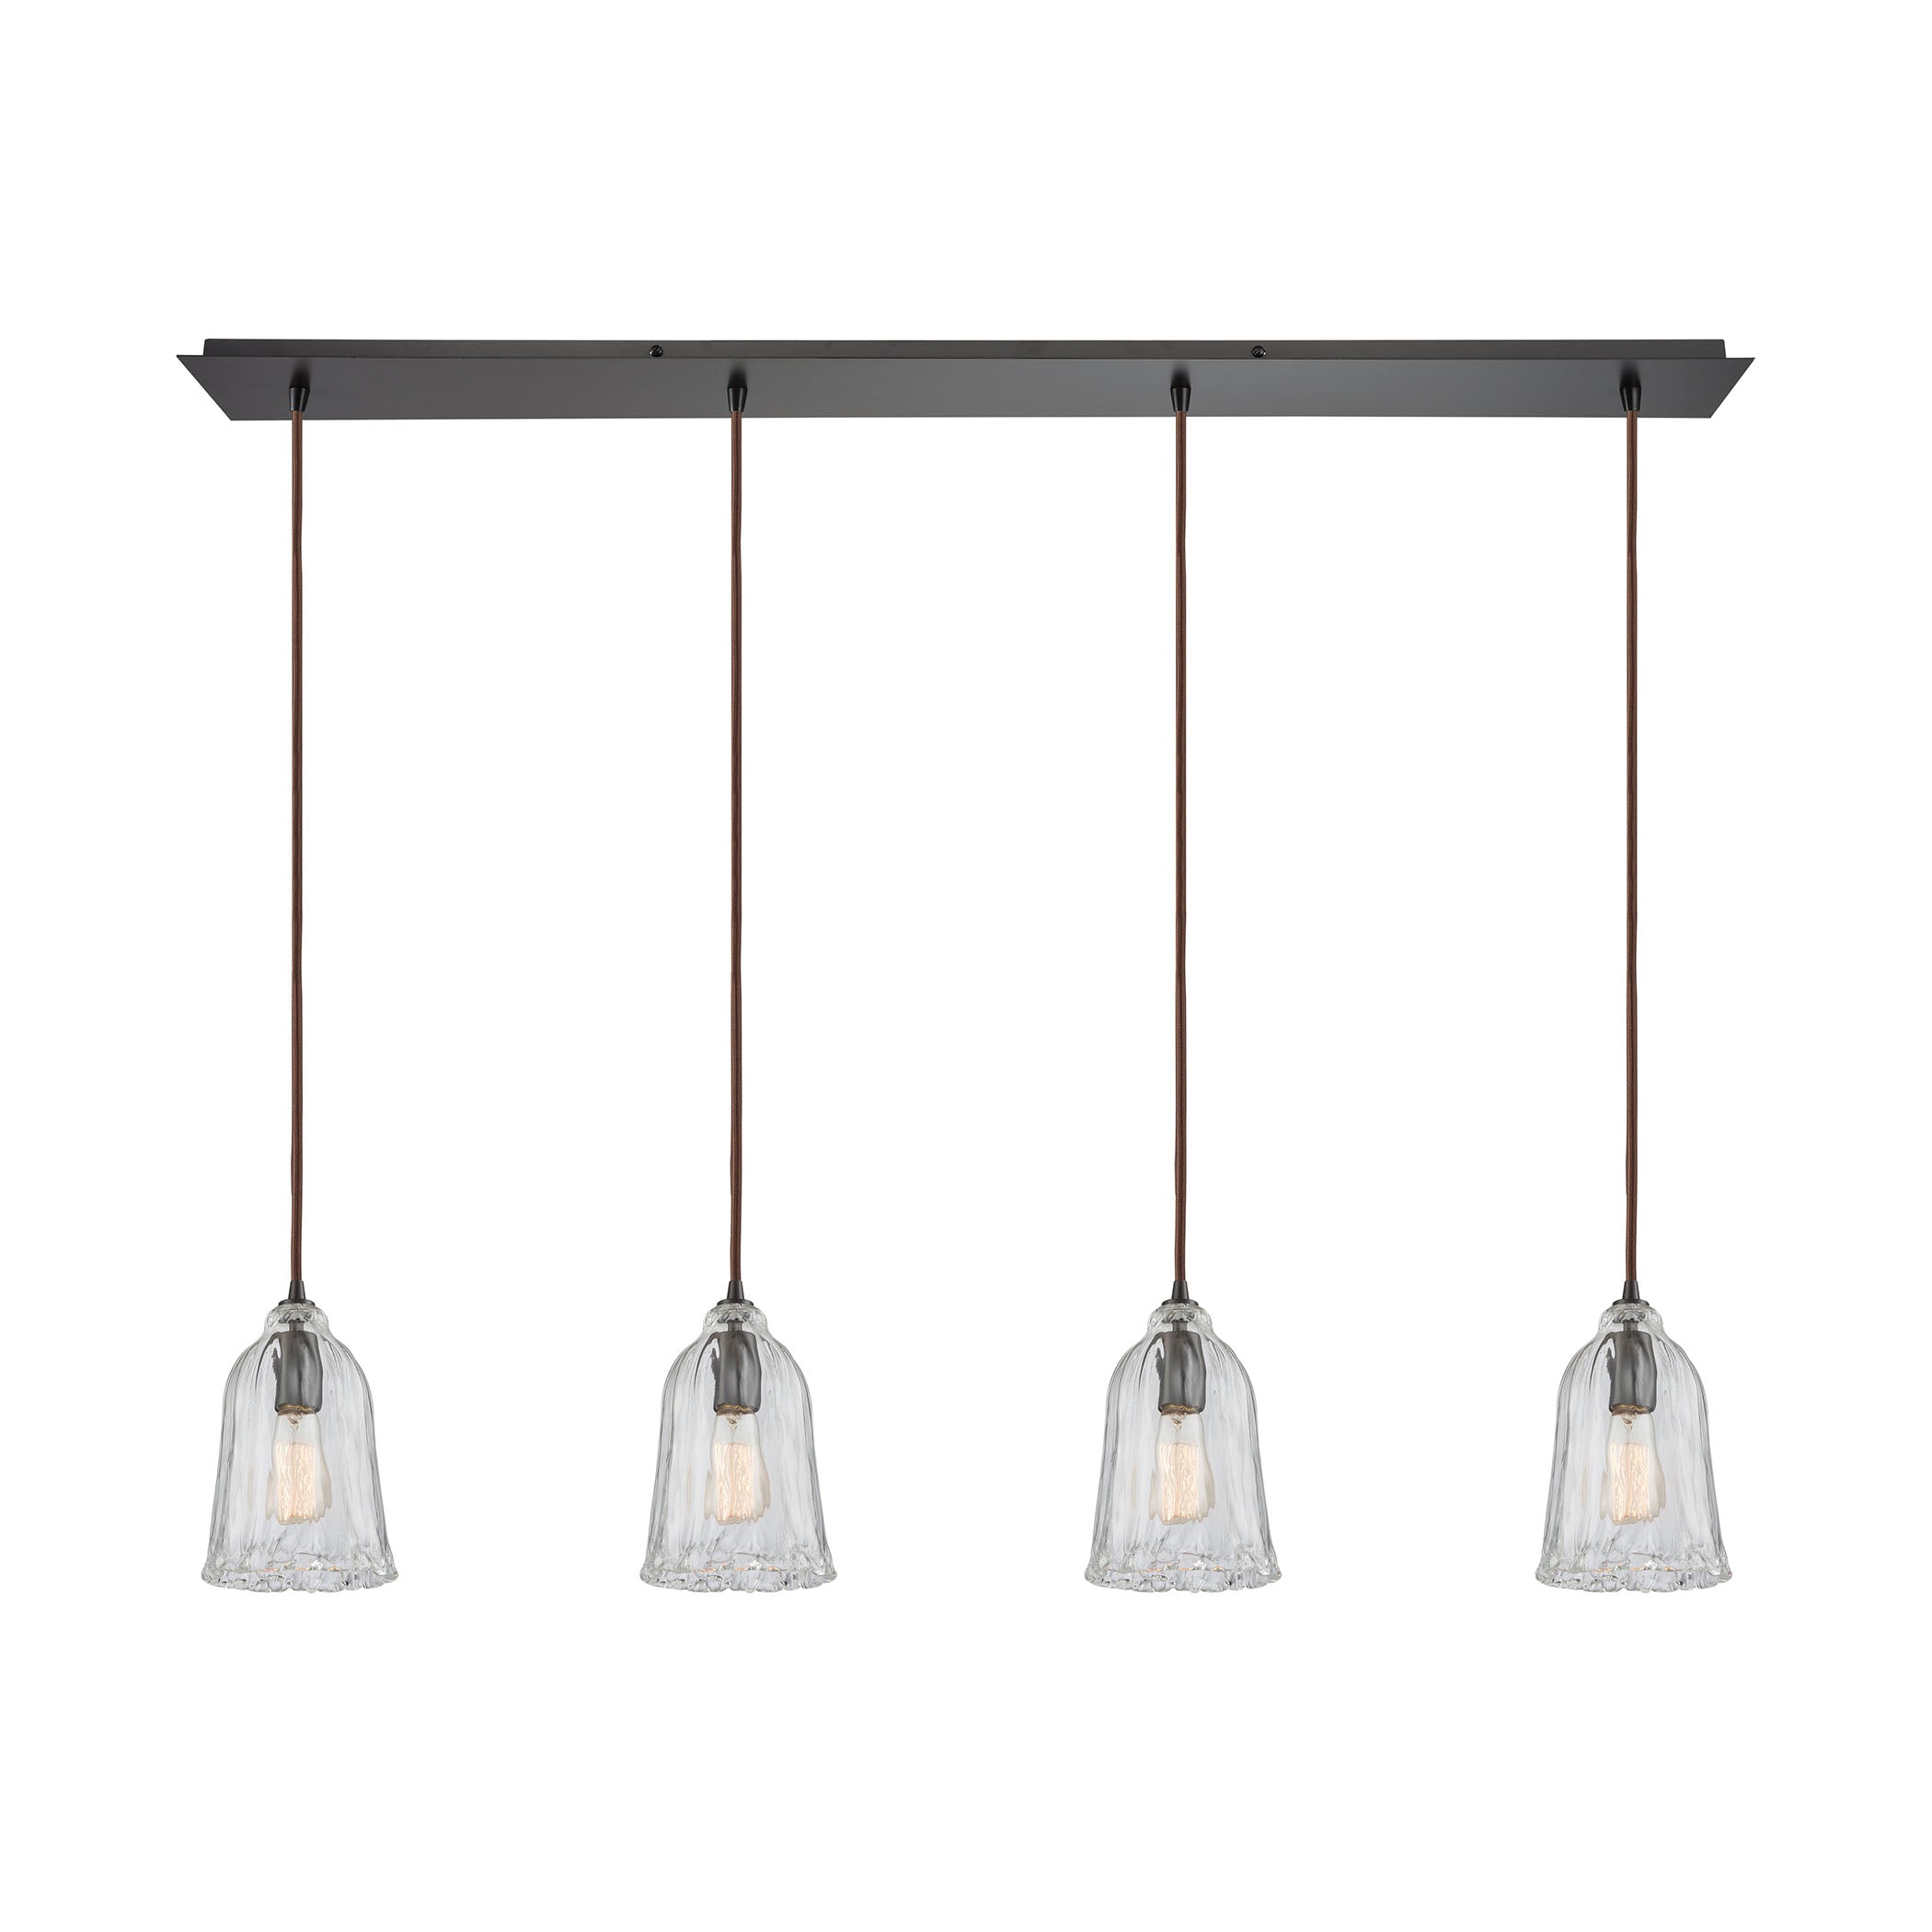 ELK Lighting 10671/4LP Hand Formed Glass 4-Light Linear Pendant Fixture in Oiled Bronze with Clear Hand-formed Glass